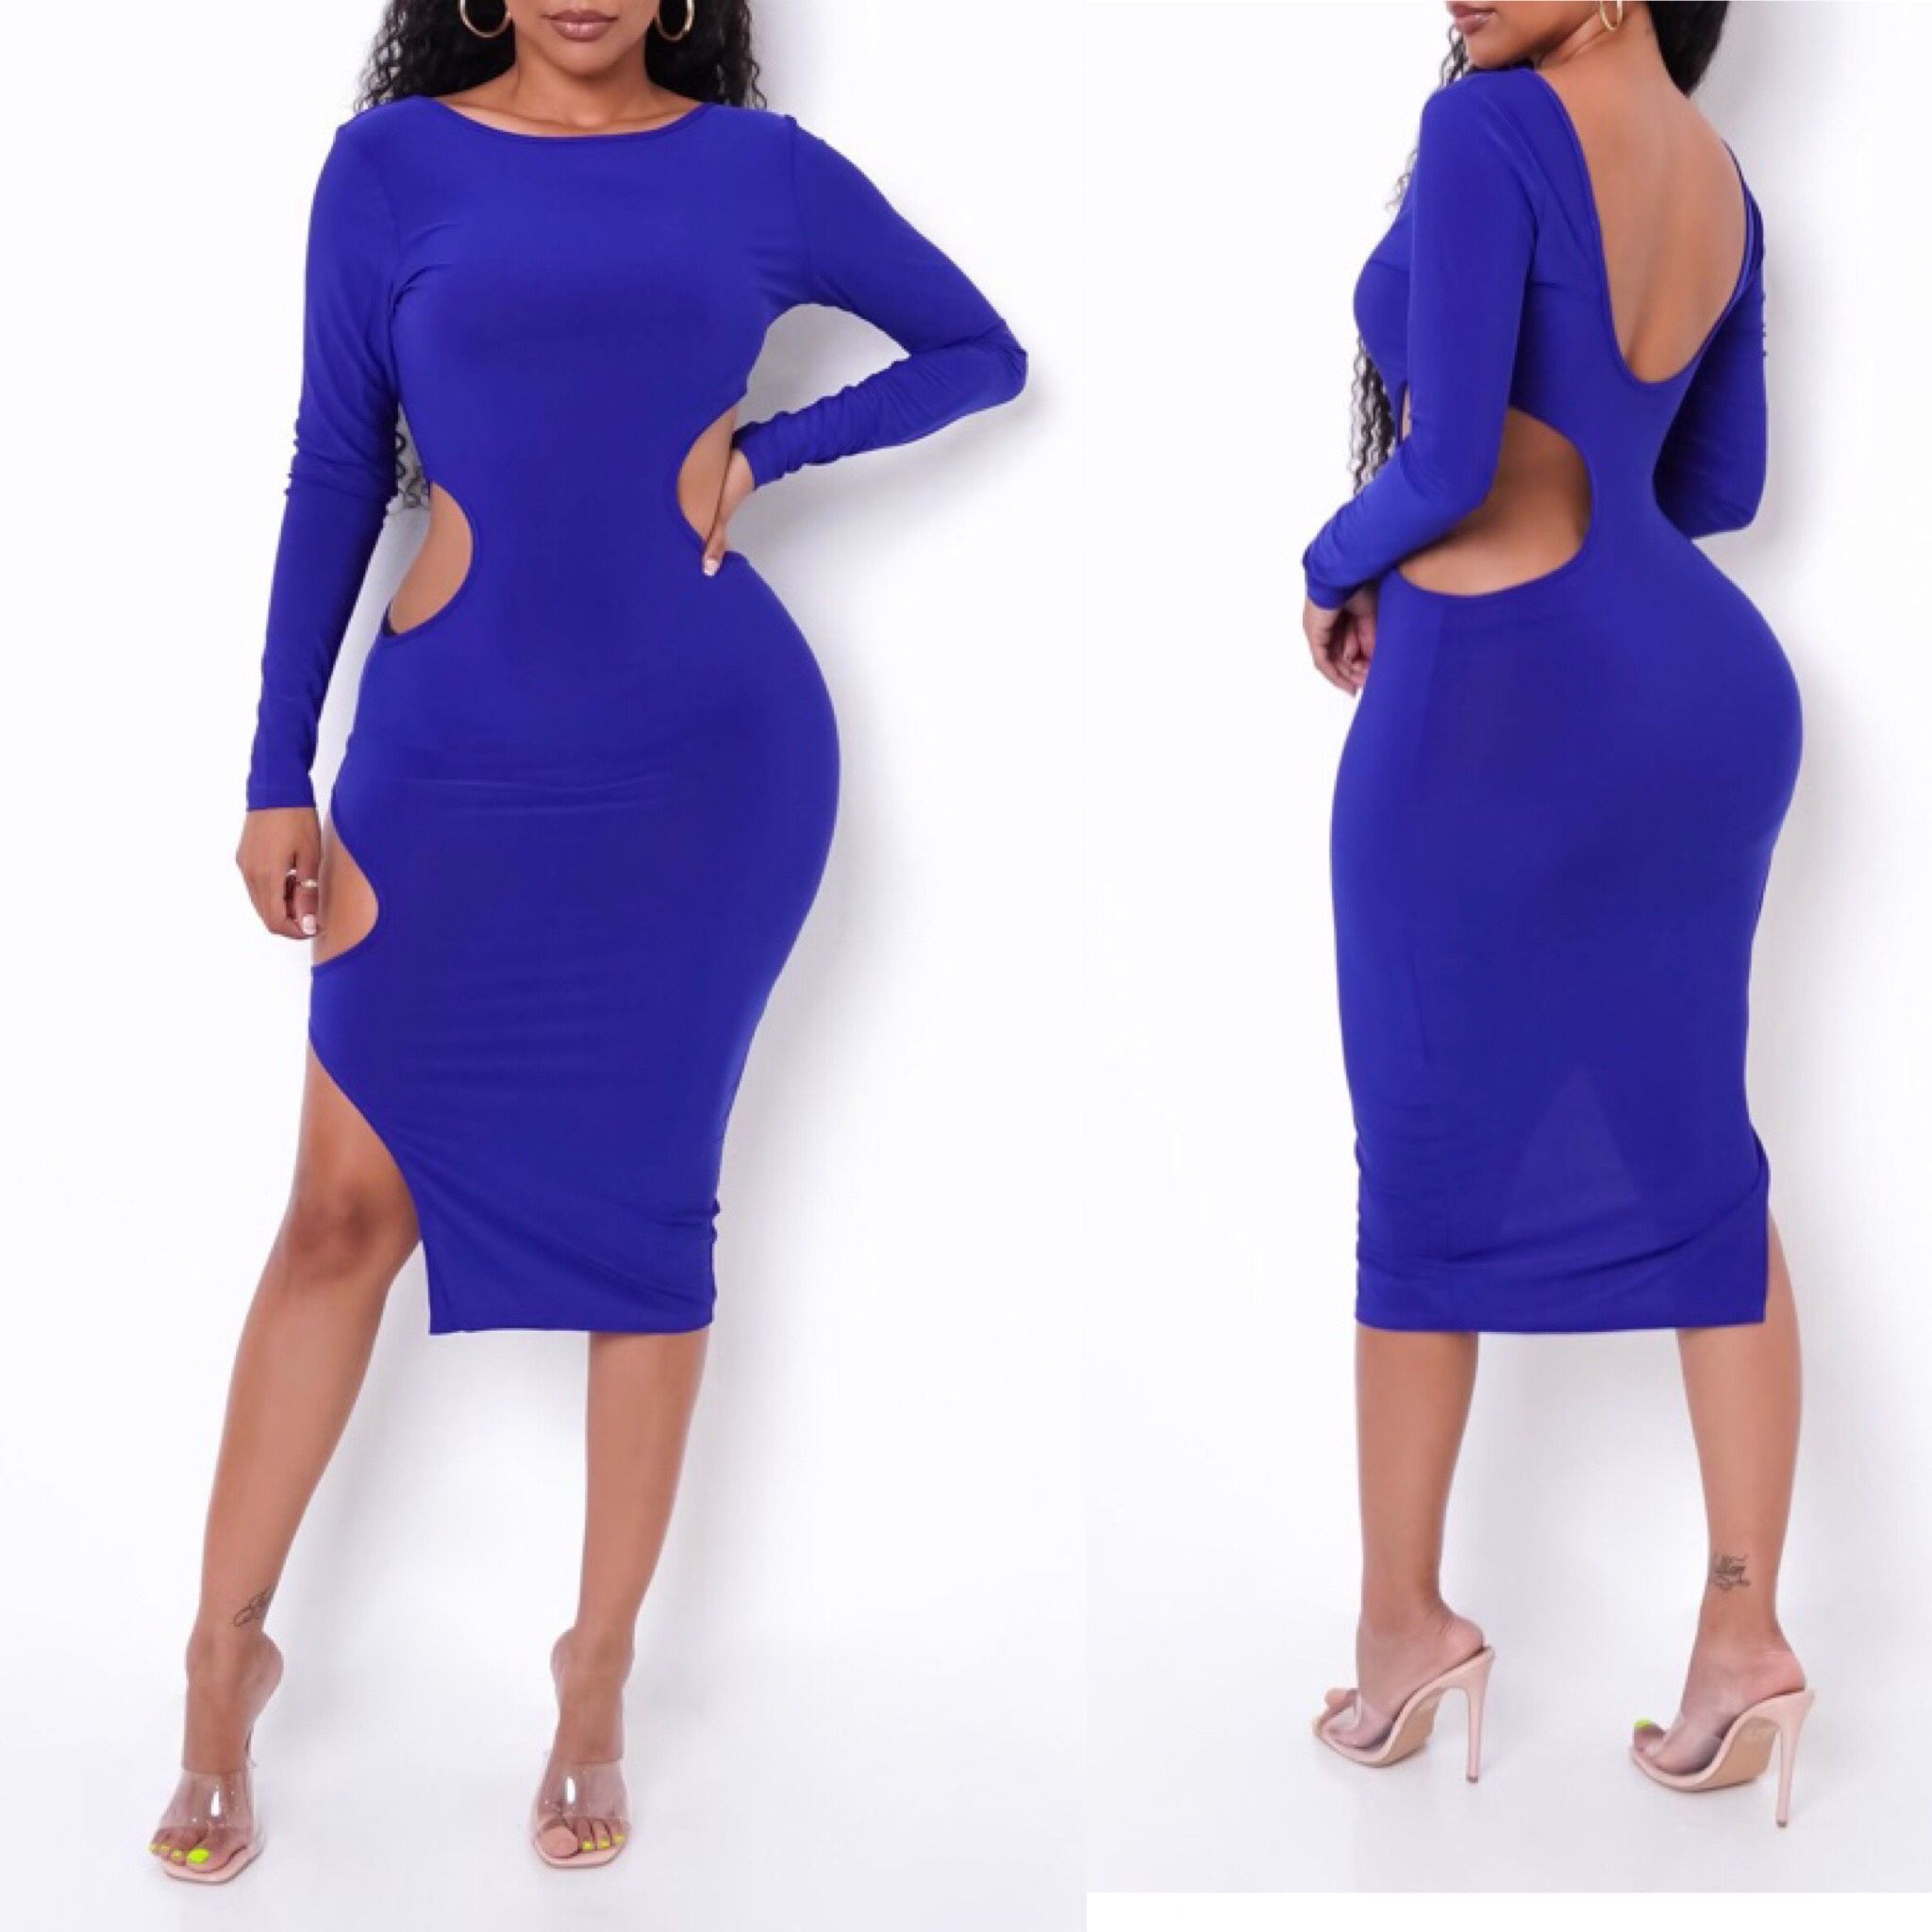 Royal Blue Dress  Size Small , Medium And Large Available 